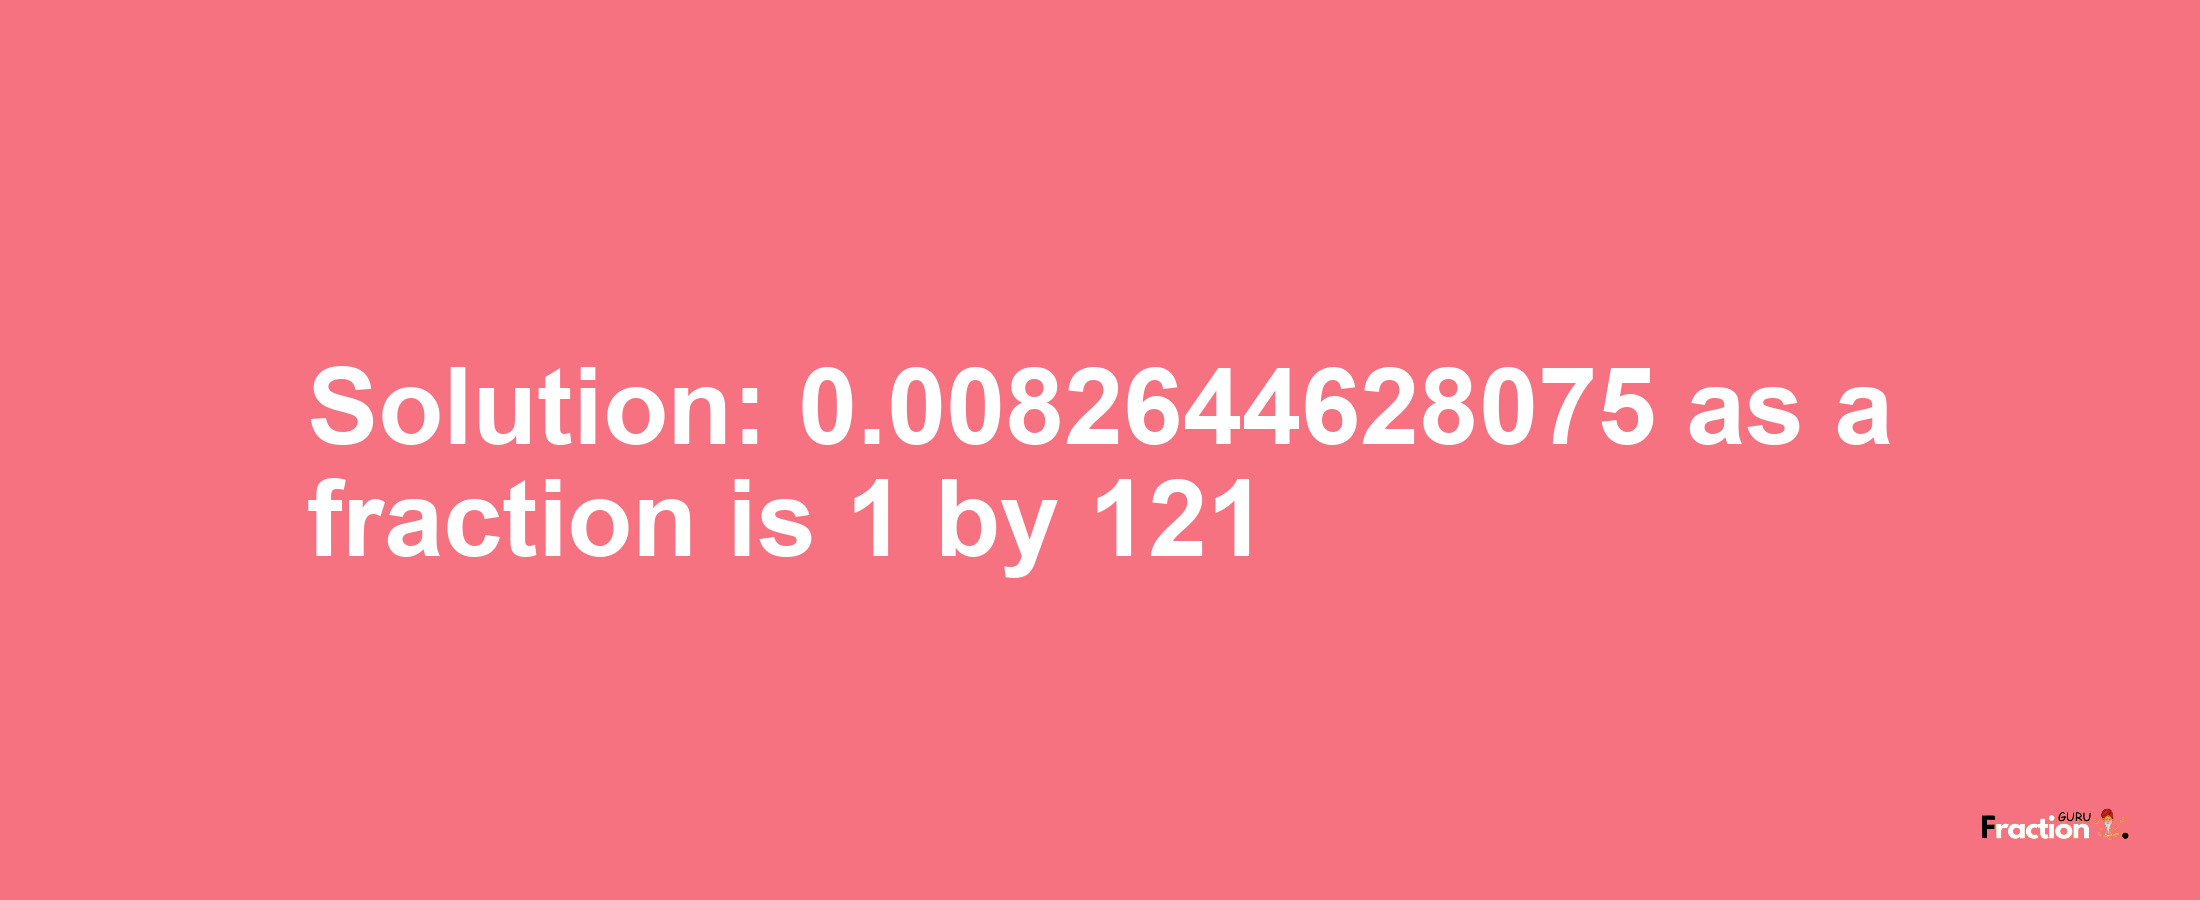 Solution:0.0082644628075 as a fraction is 1/121